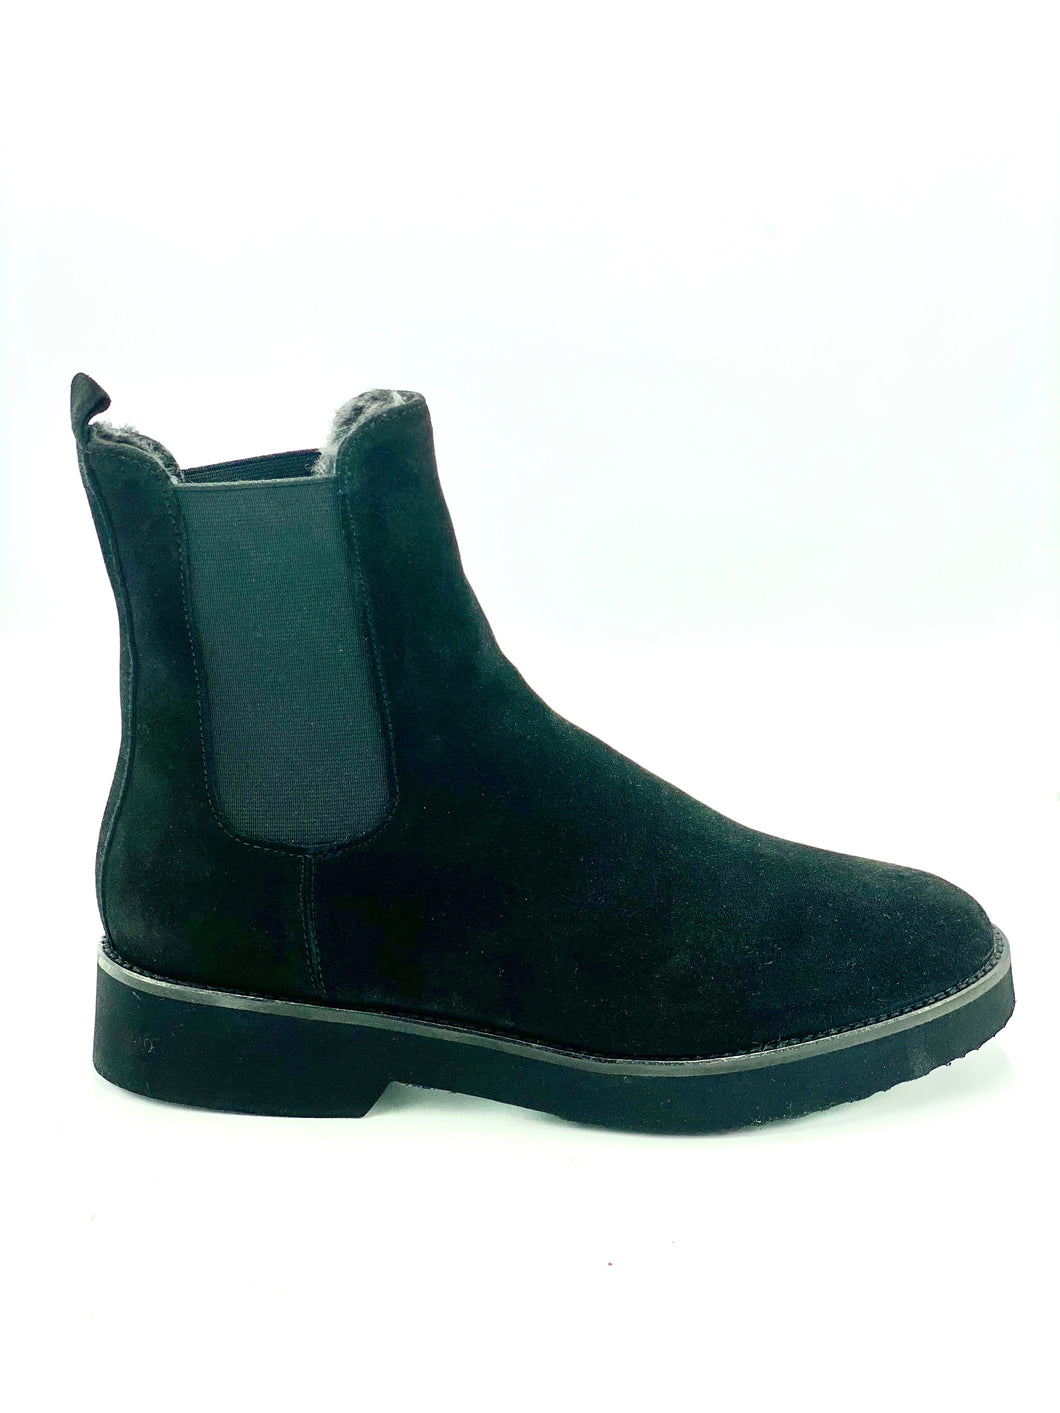 Homers Eagle ankle boot in black suede.